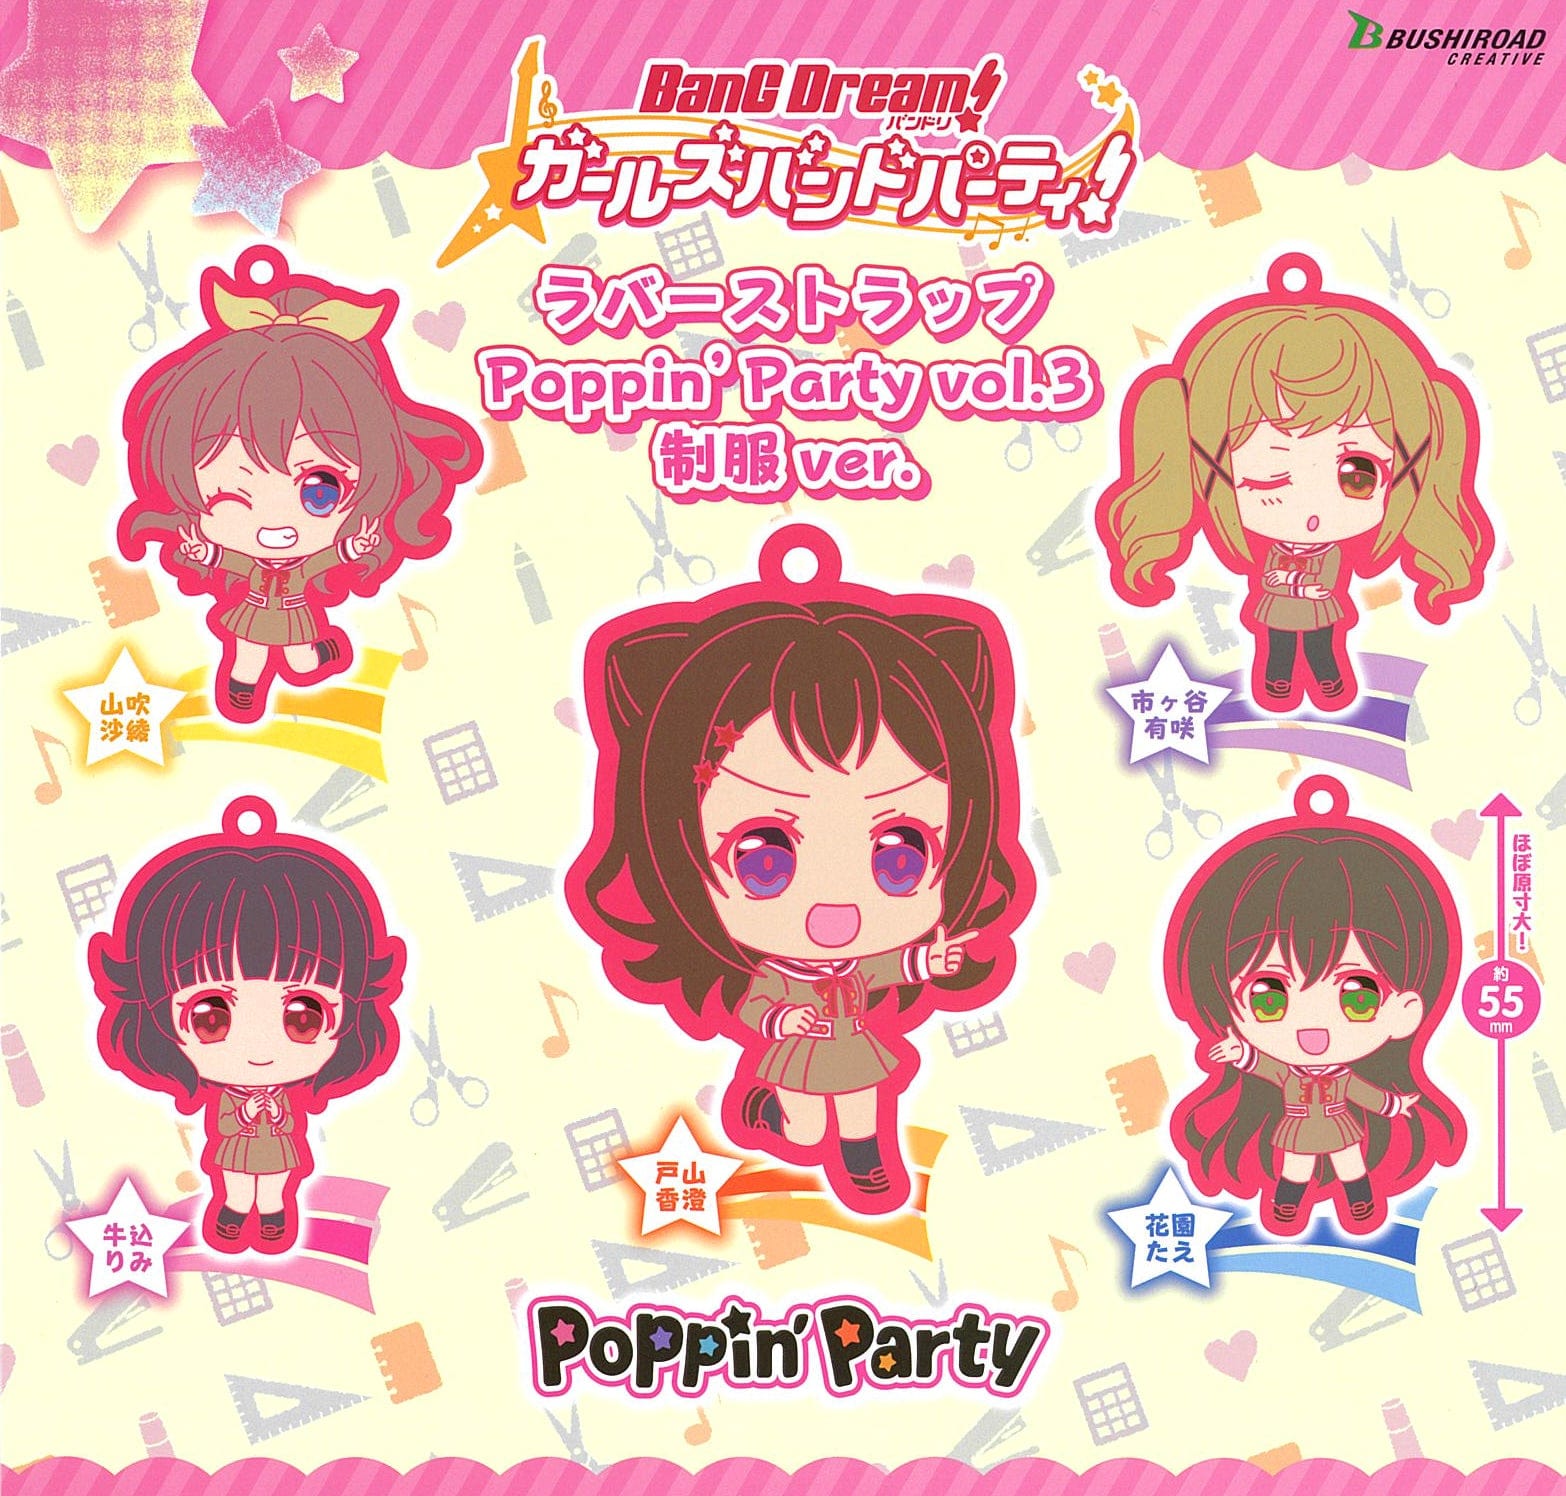 Bushiroad Creative CP0315 - BanG Dream ! Girls  Band Party ! - Rubber Strap Poppin Party Vol.3 - School Uniform Ver - Complete Set